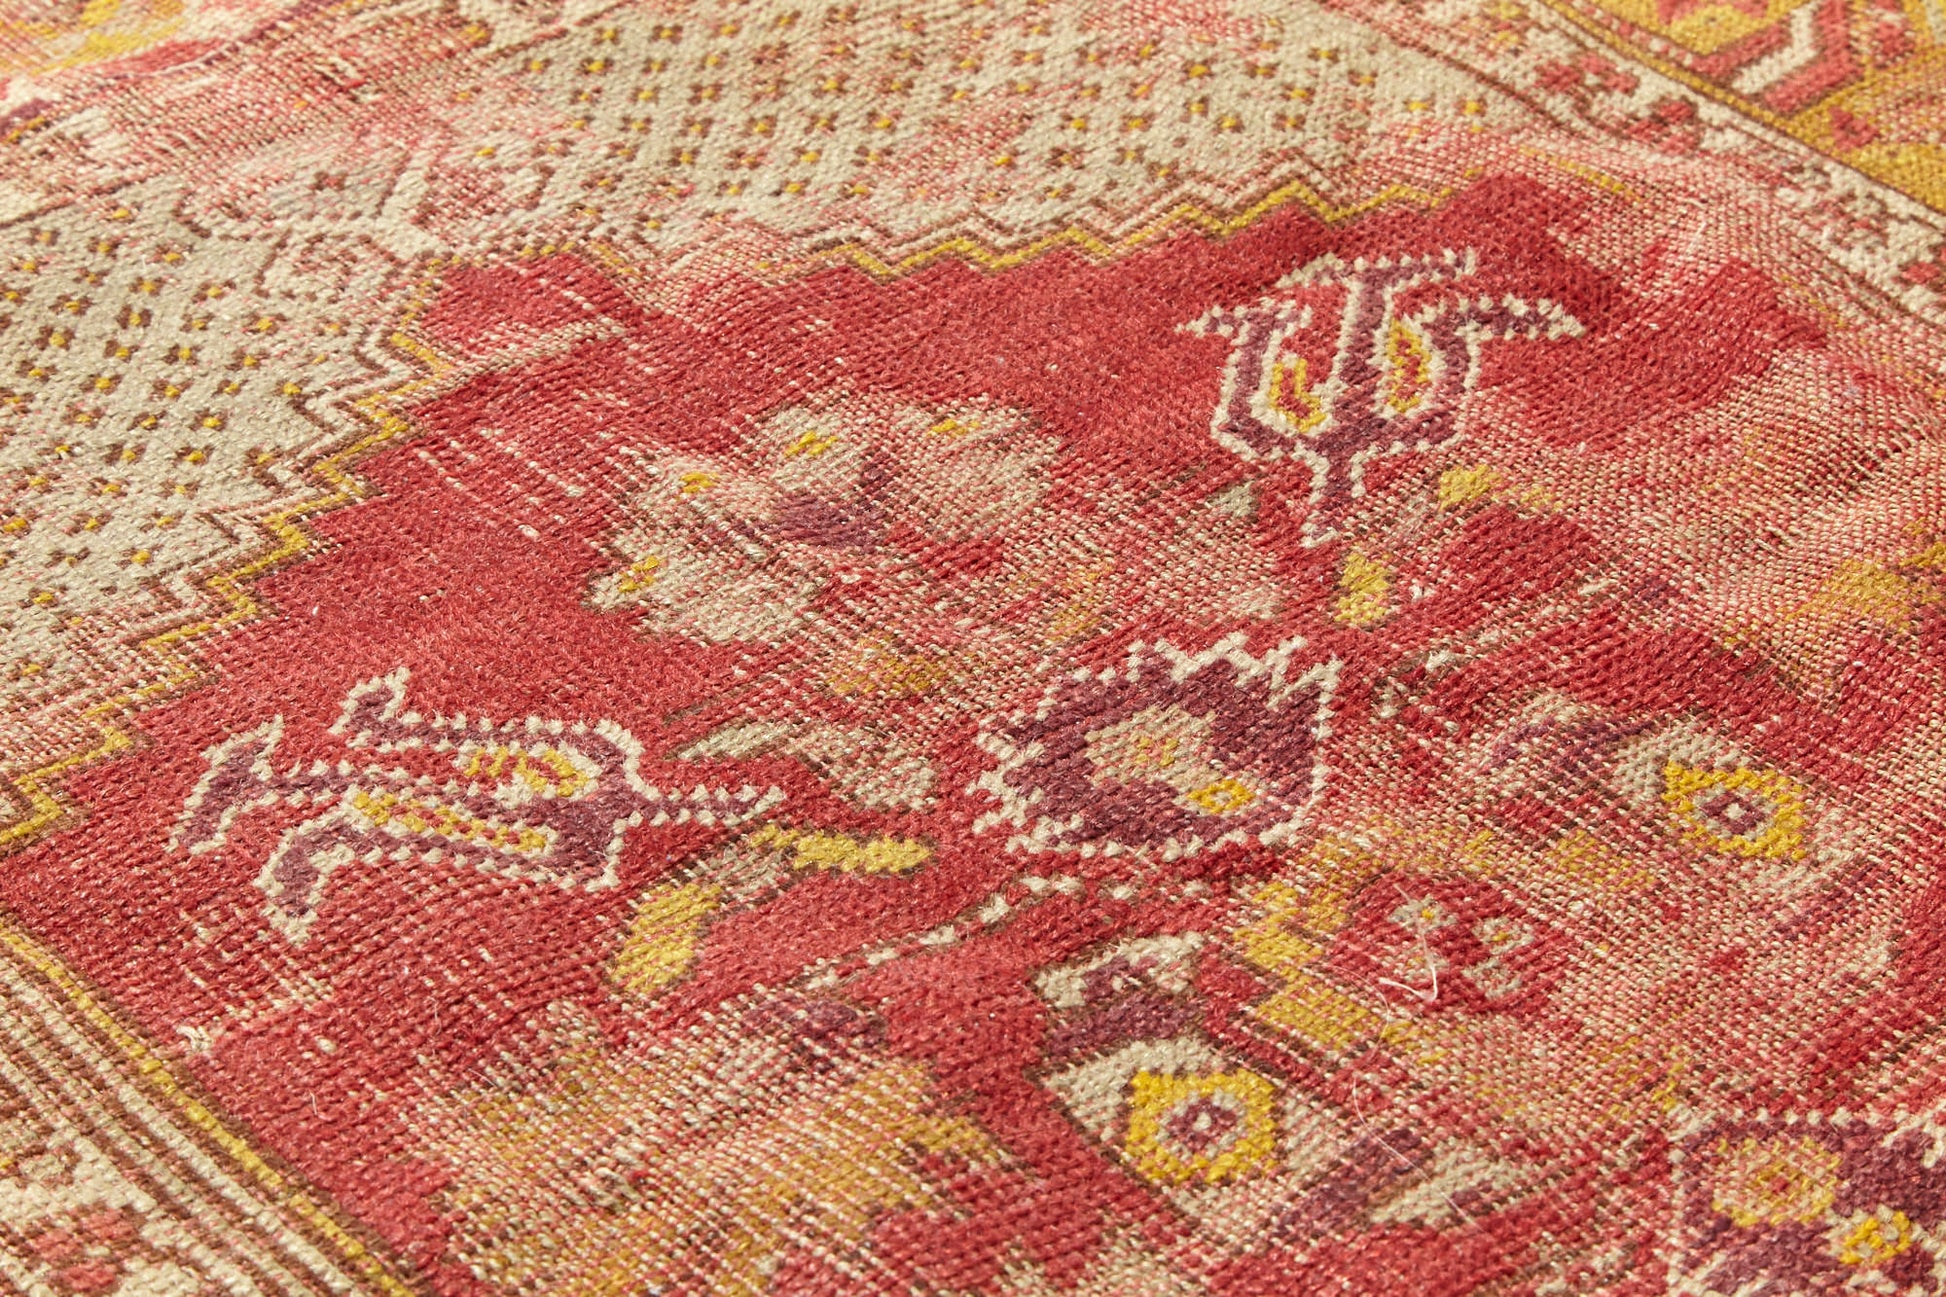 Detail of antique Turkish Prayer Rug, hand woven in red and gold, perfect for a bed room, study or kitchen rug - Available from King Kennedy Rugs Los Angeles